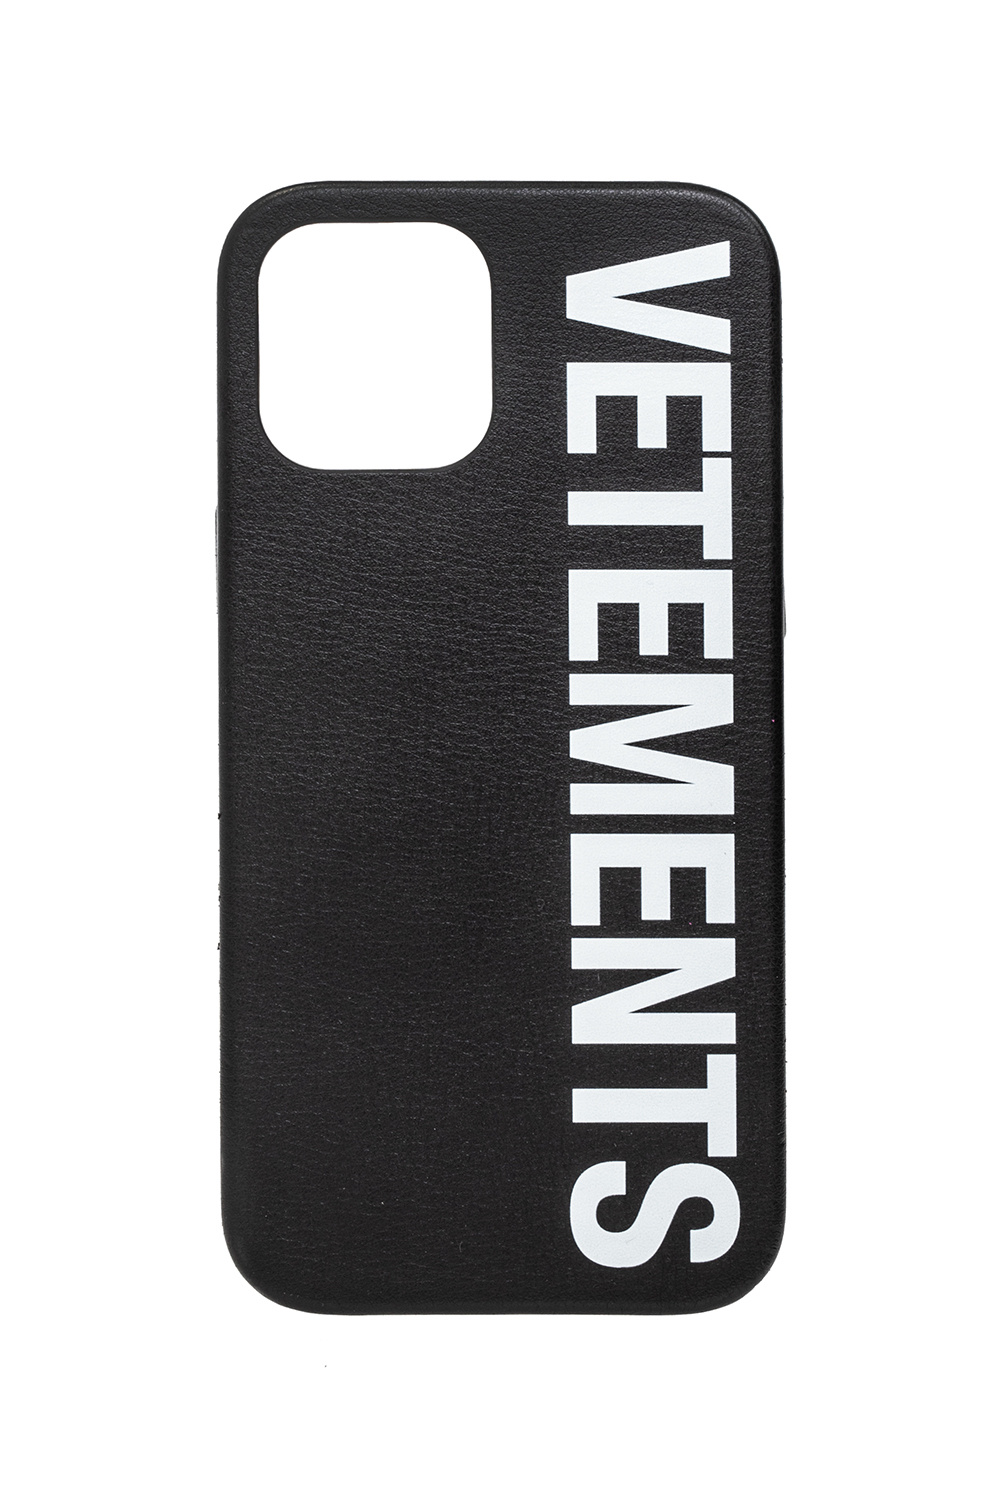 VETEMENTS FASHION IS ALL ABOUT FUN